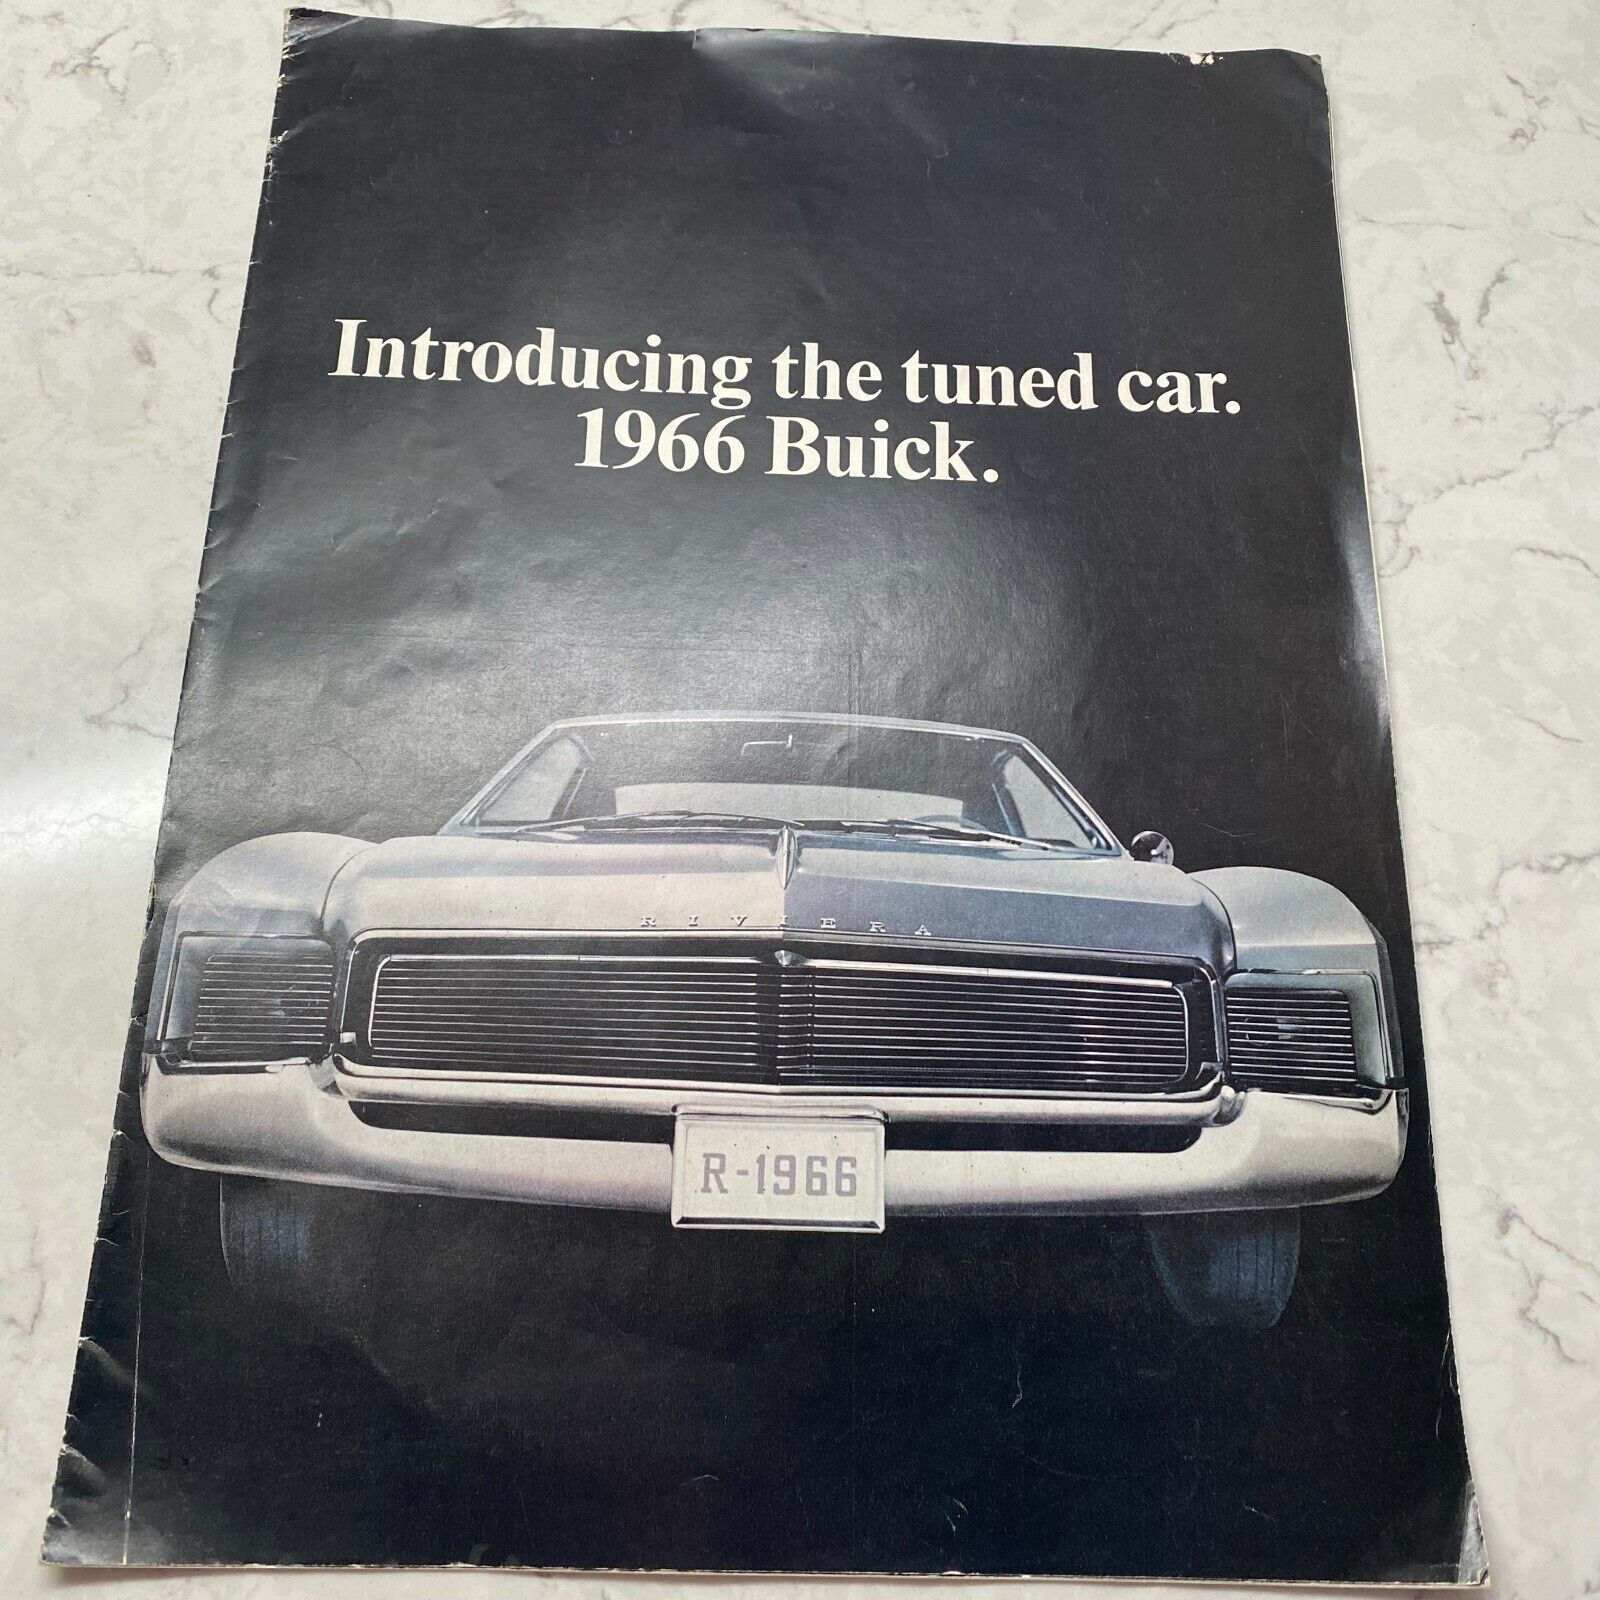 Vintage The Tuned Car 1966 Buick Riviera & Buick Electra 225 Cars Sales Brochure